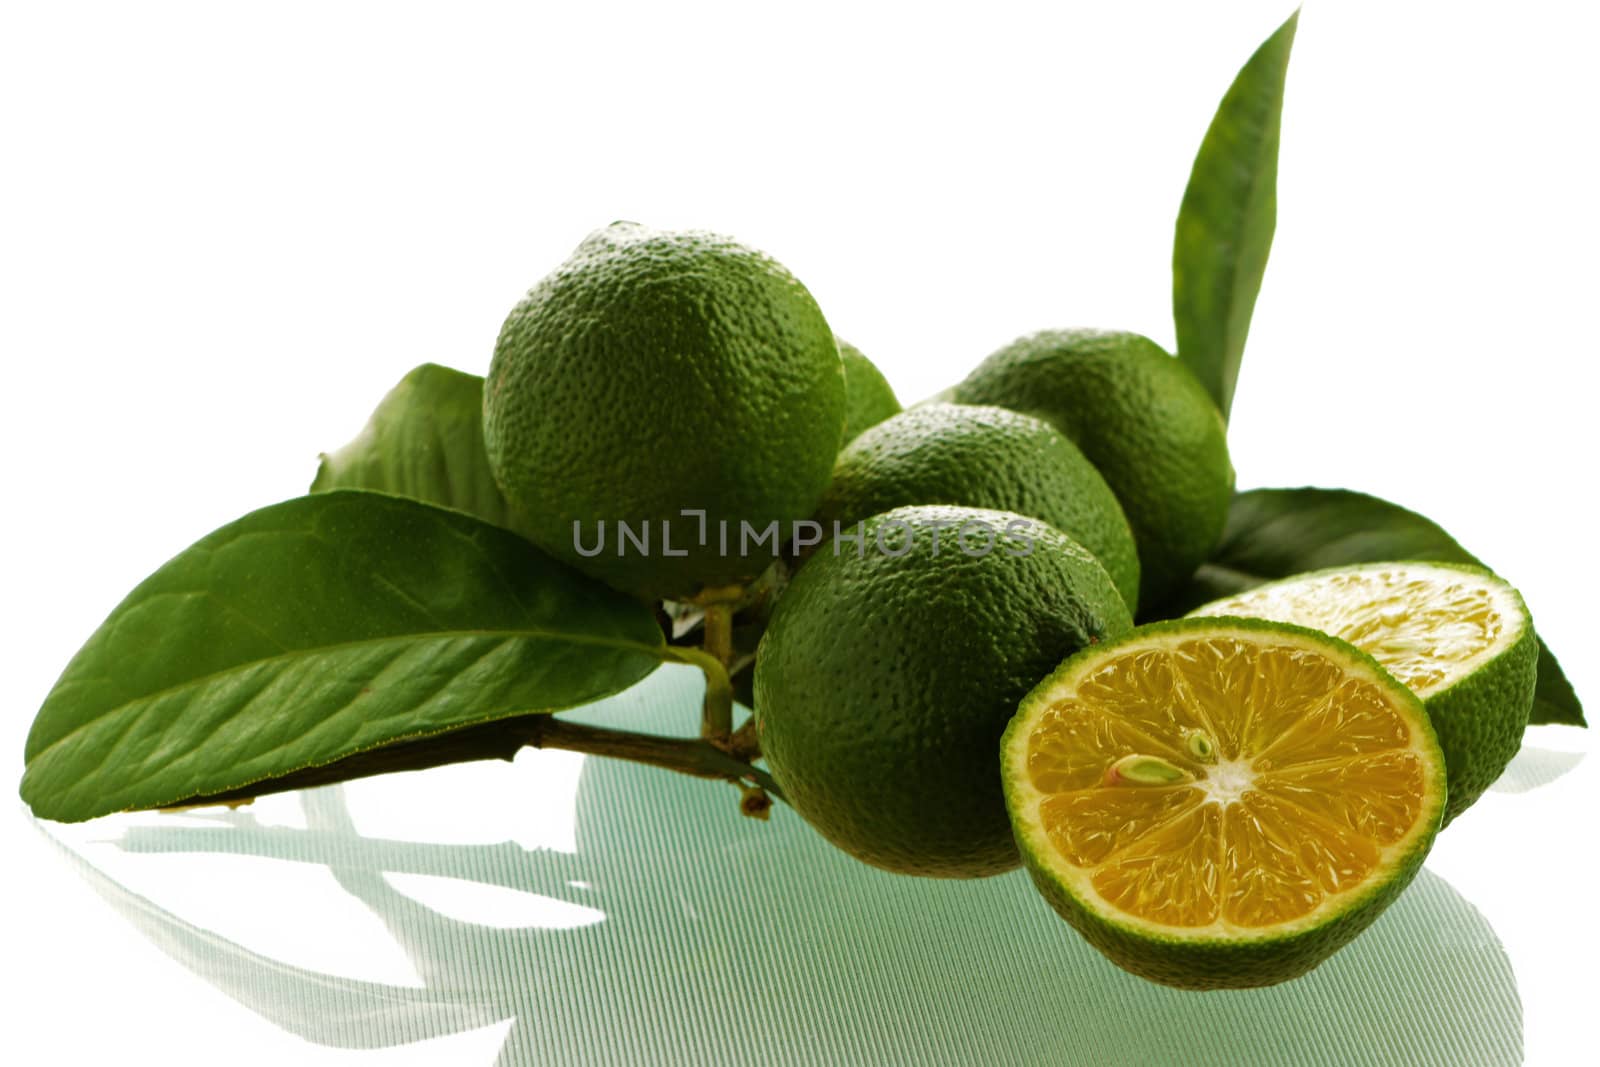 Arrangement of freshly picked limes withone cut in half.